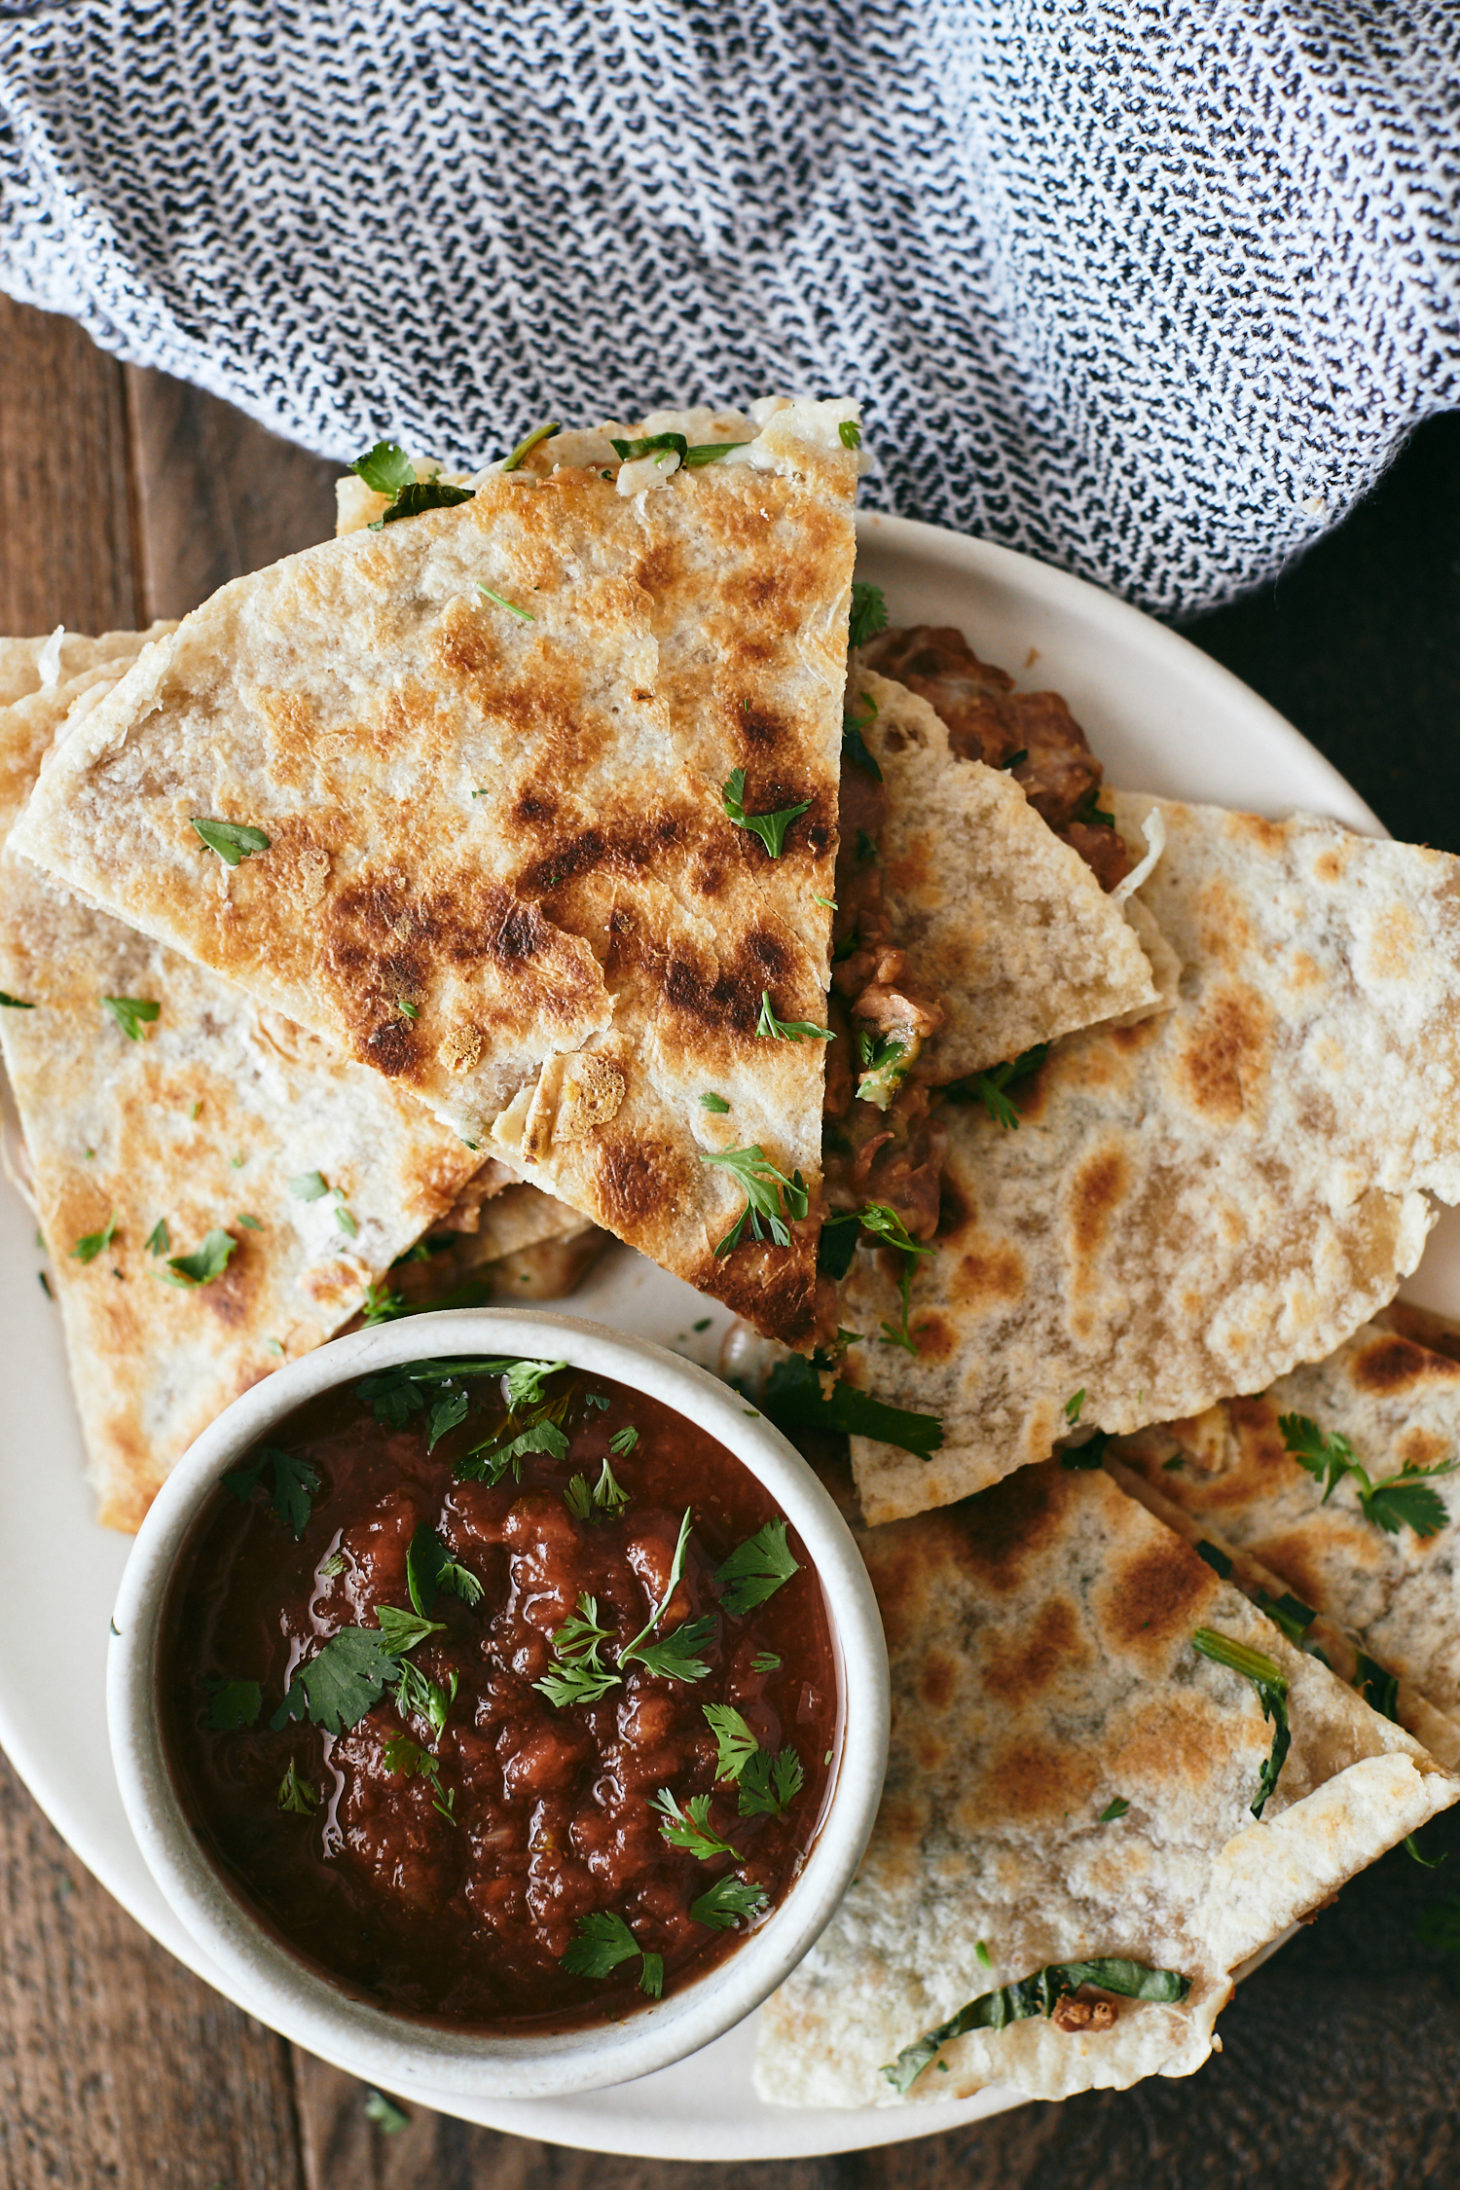 Spinach Quesadillas with Spiced Pinto Beans